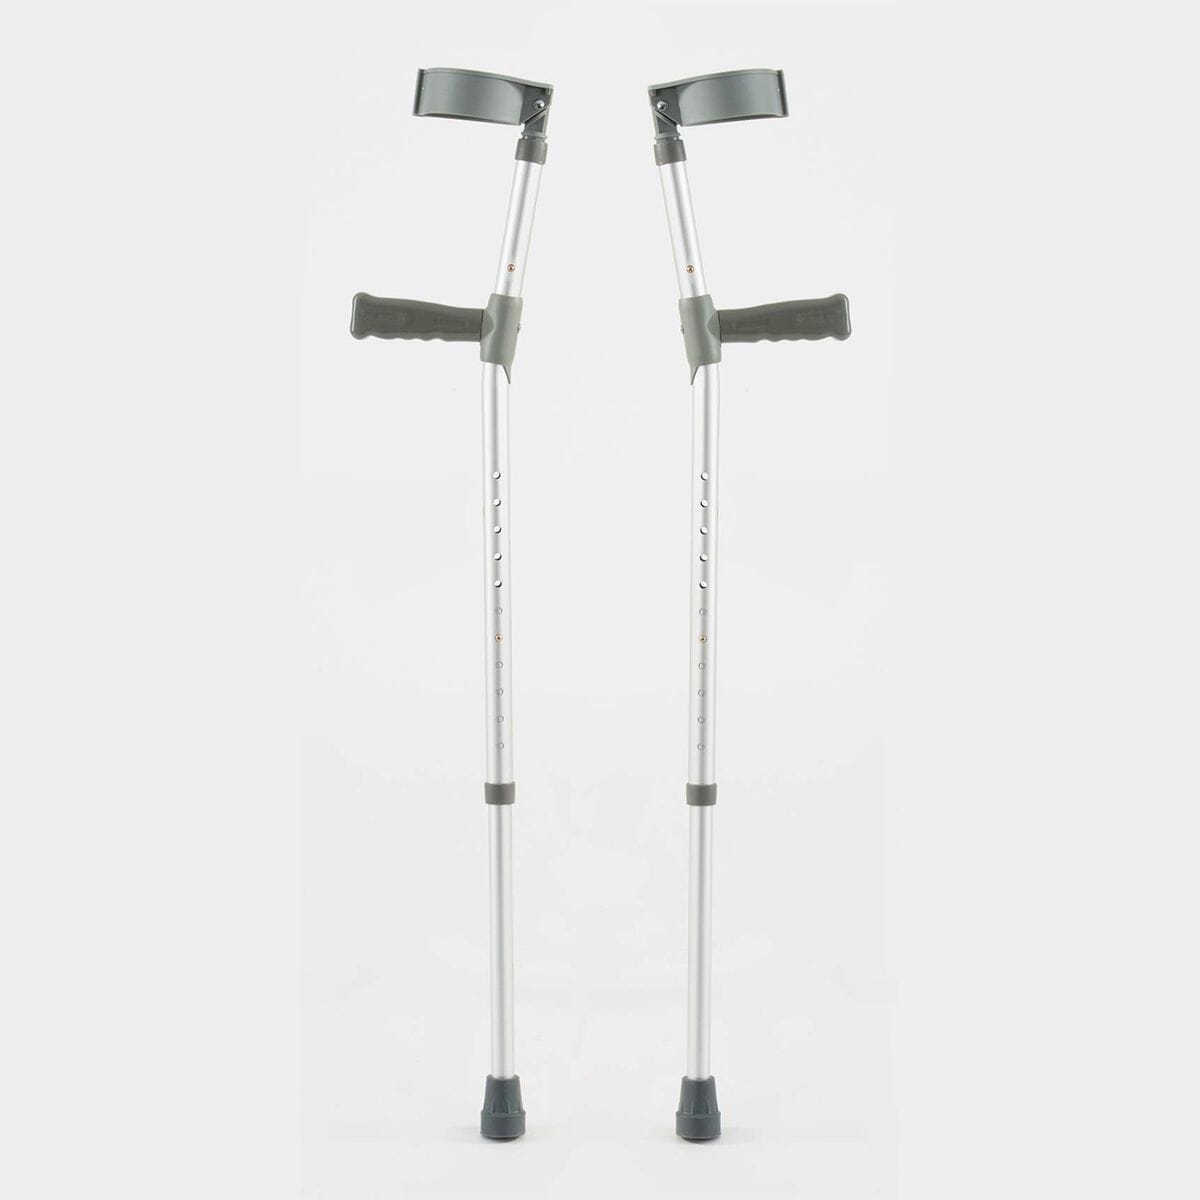 View Anatomic Handle Crutches information